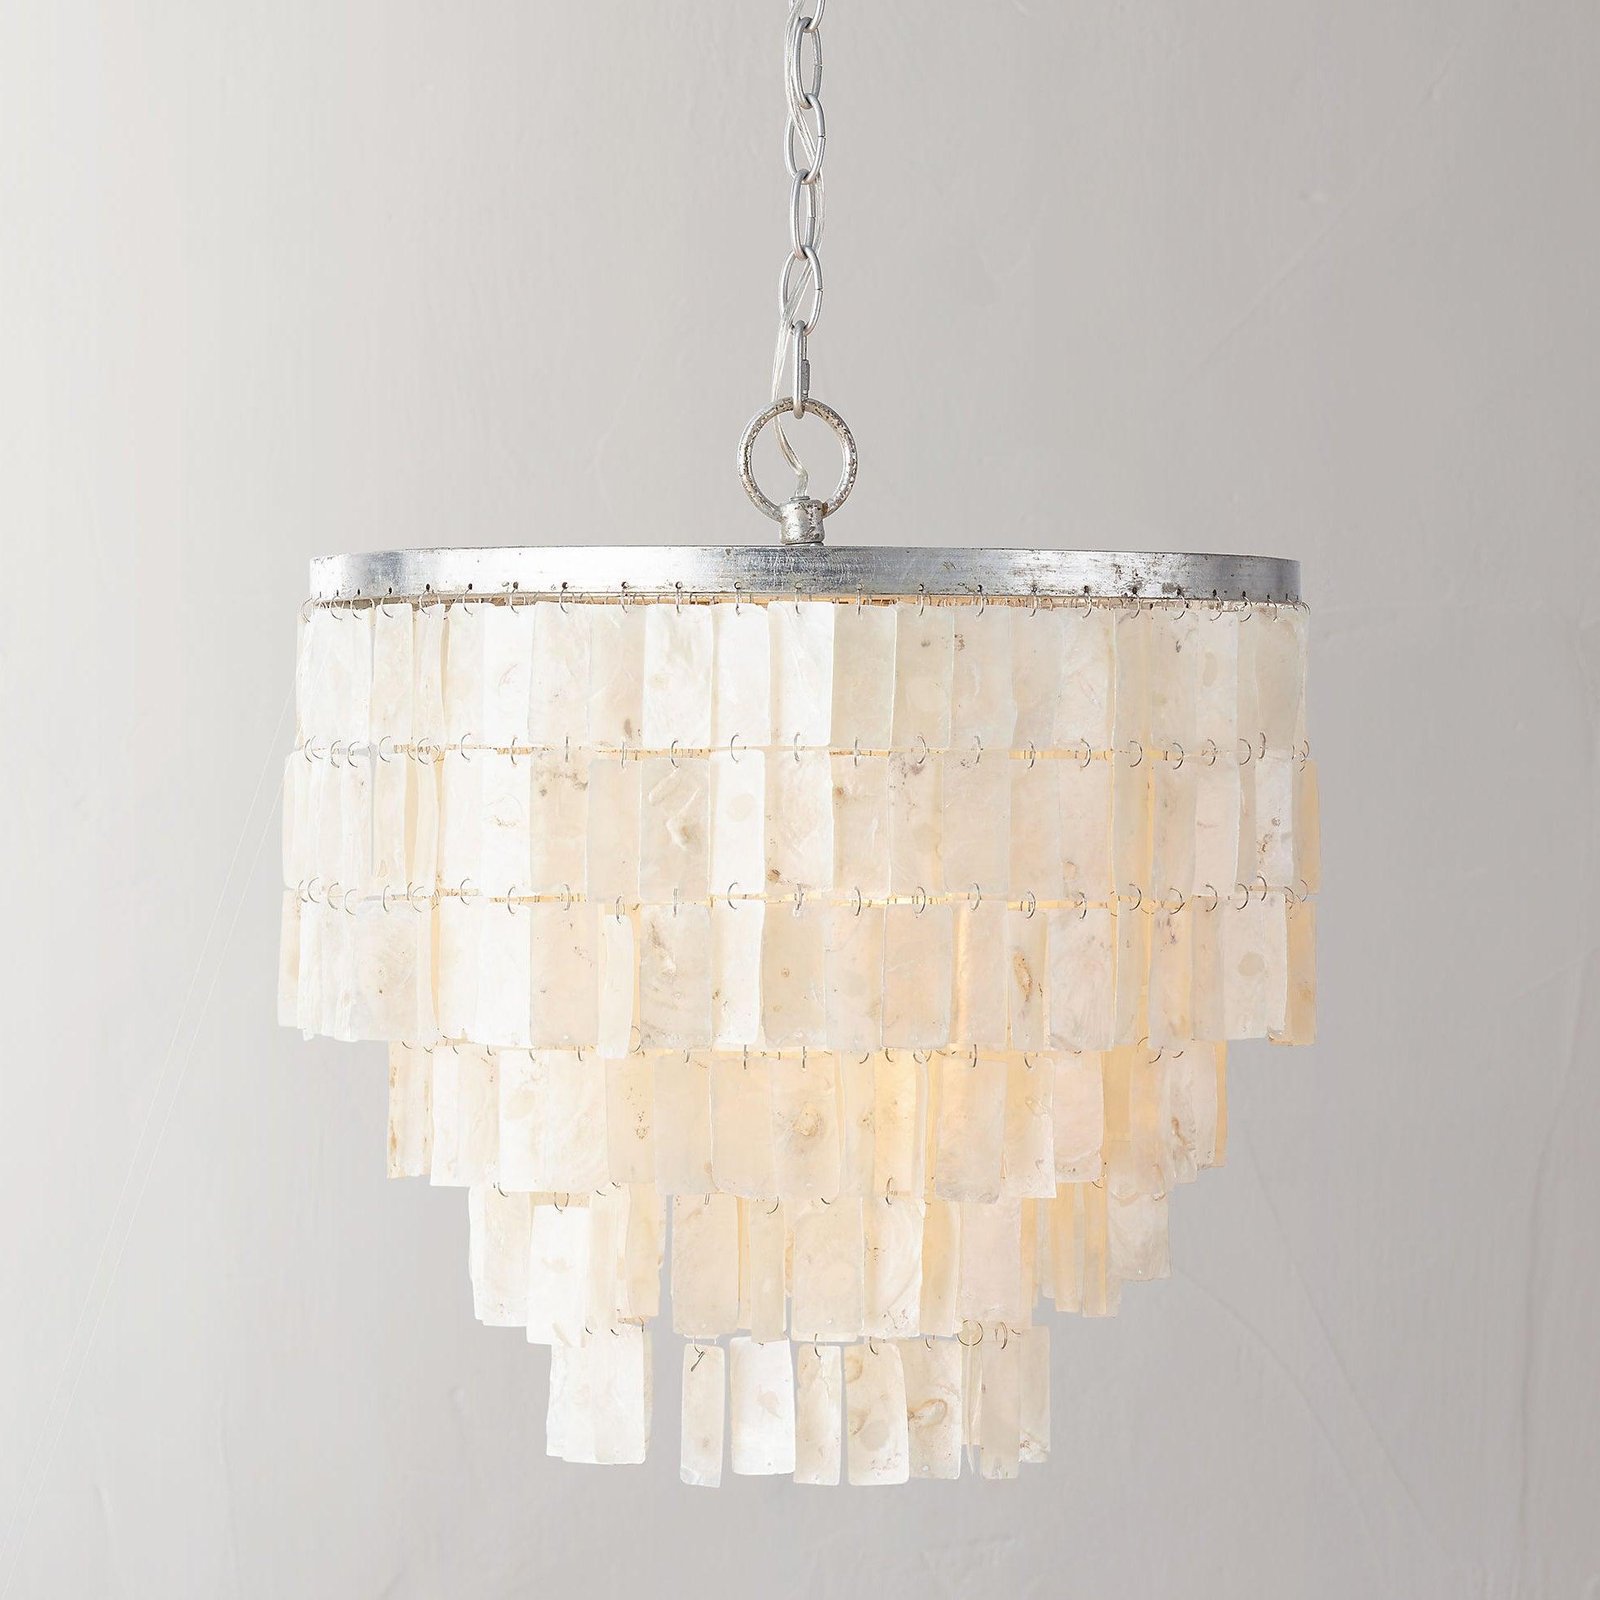 Silver+White Skye Tiered Pendant Light, measuring 21.7 inches in diameter and 19.7 inches in height (or 55cm x 50cm)